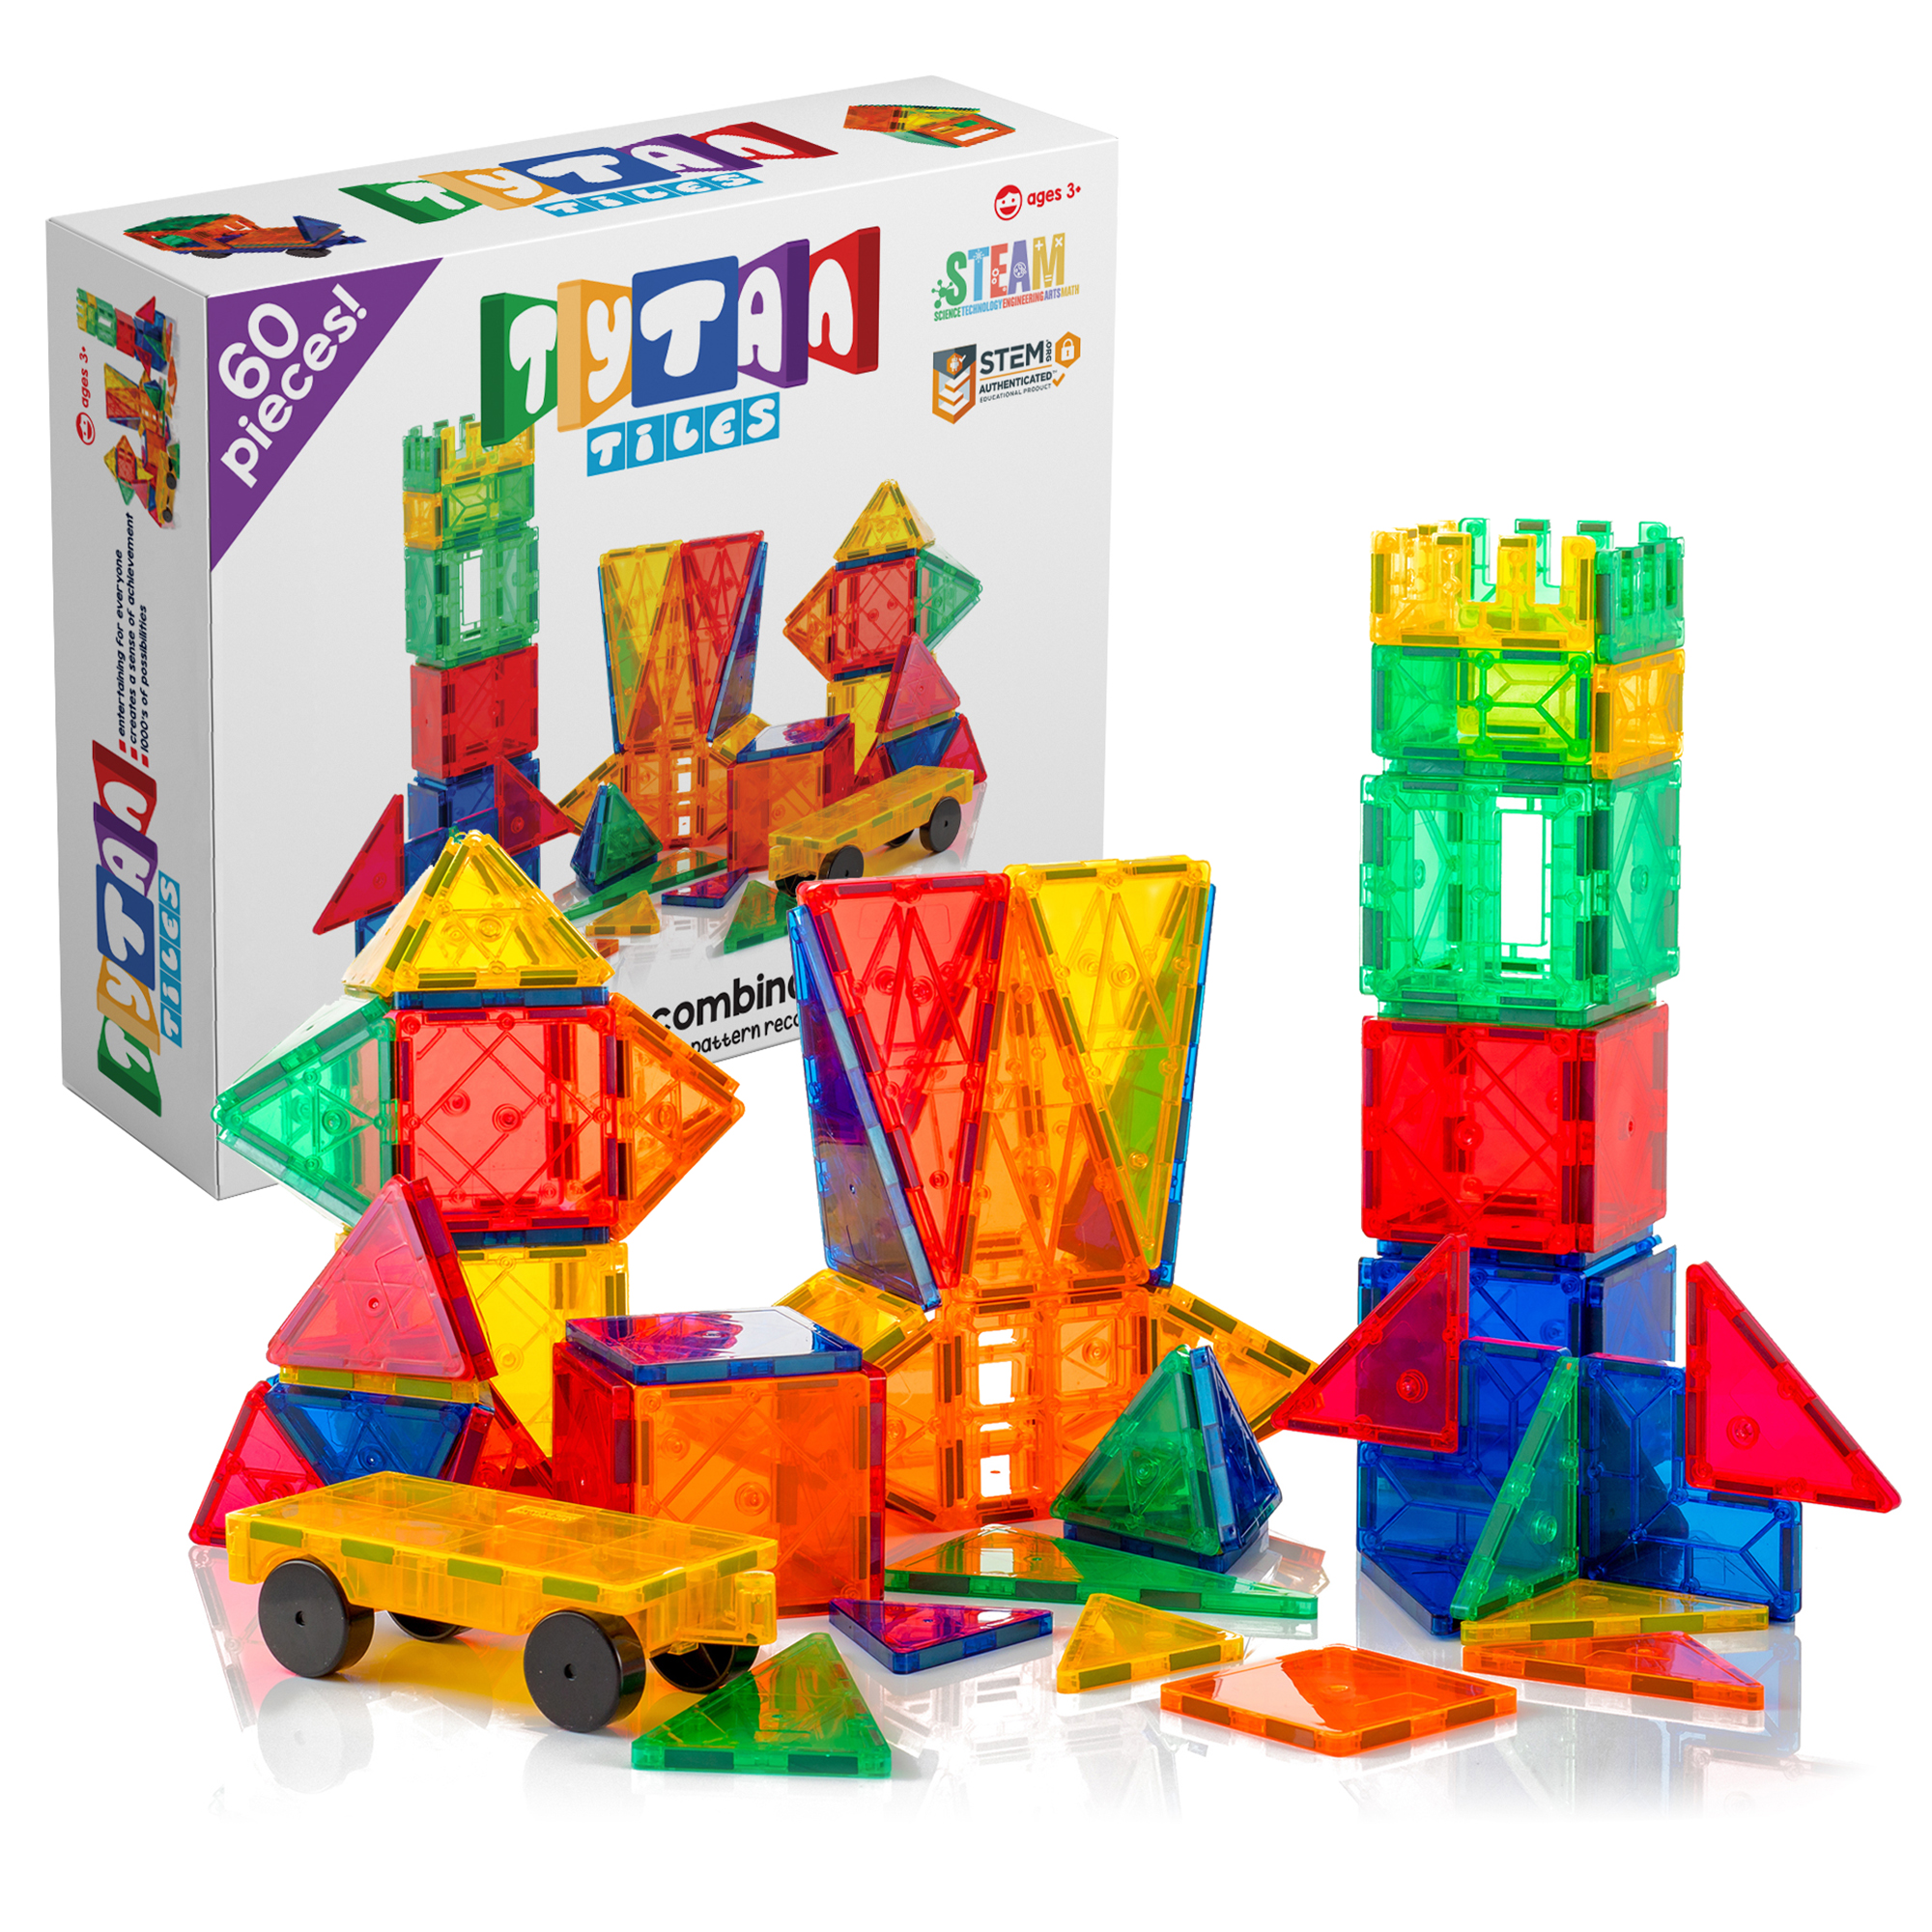 60-Piece Tytan Magnetic Learning Tiles w/ Included Car & Carrying Bag $19.97 at Walmart